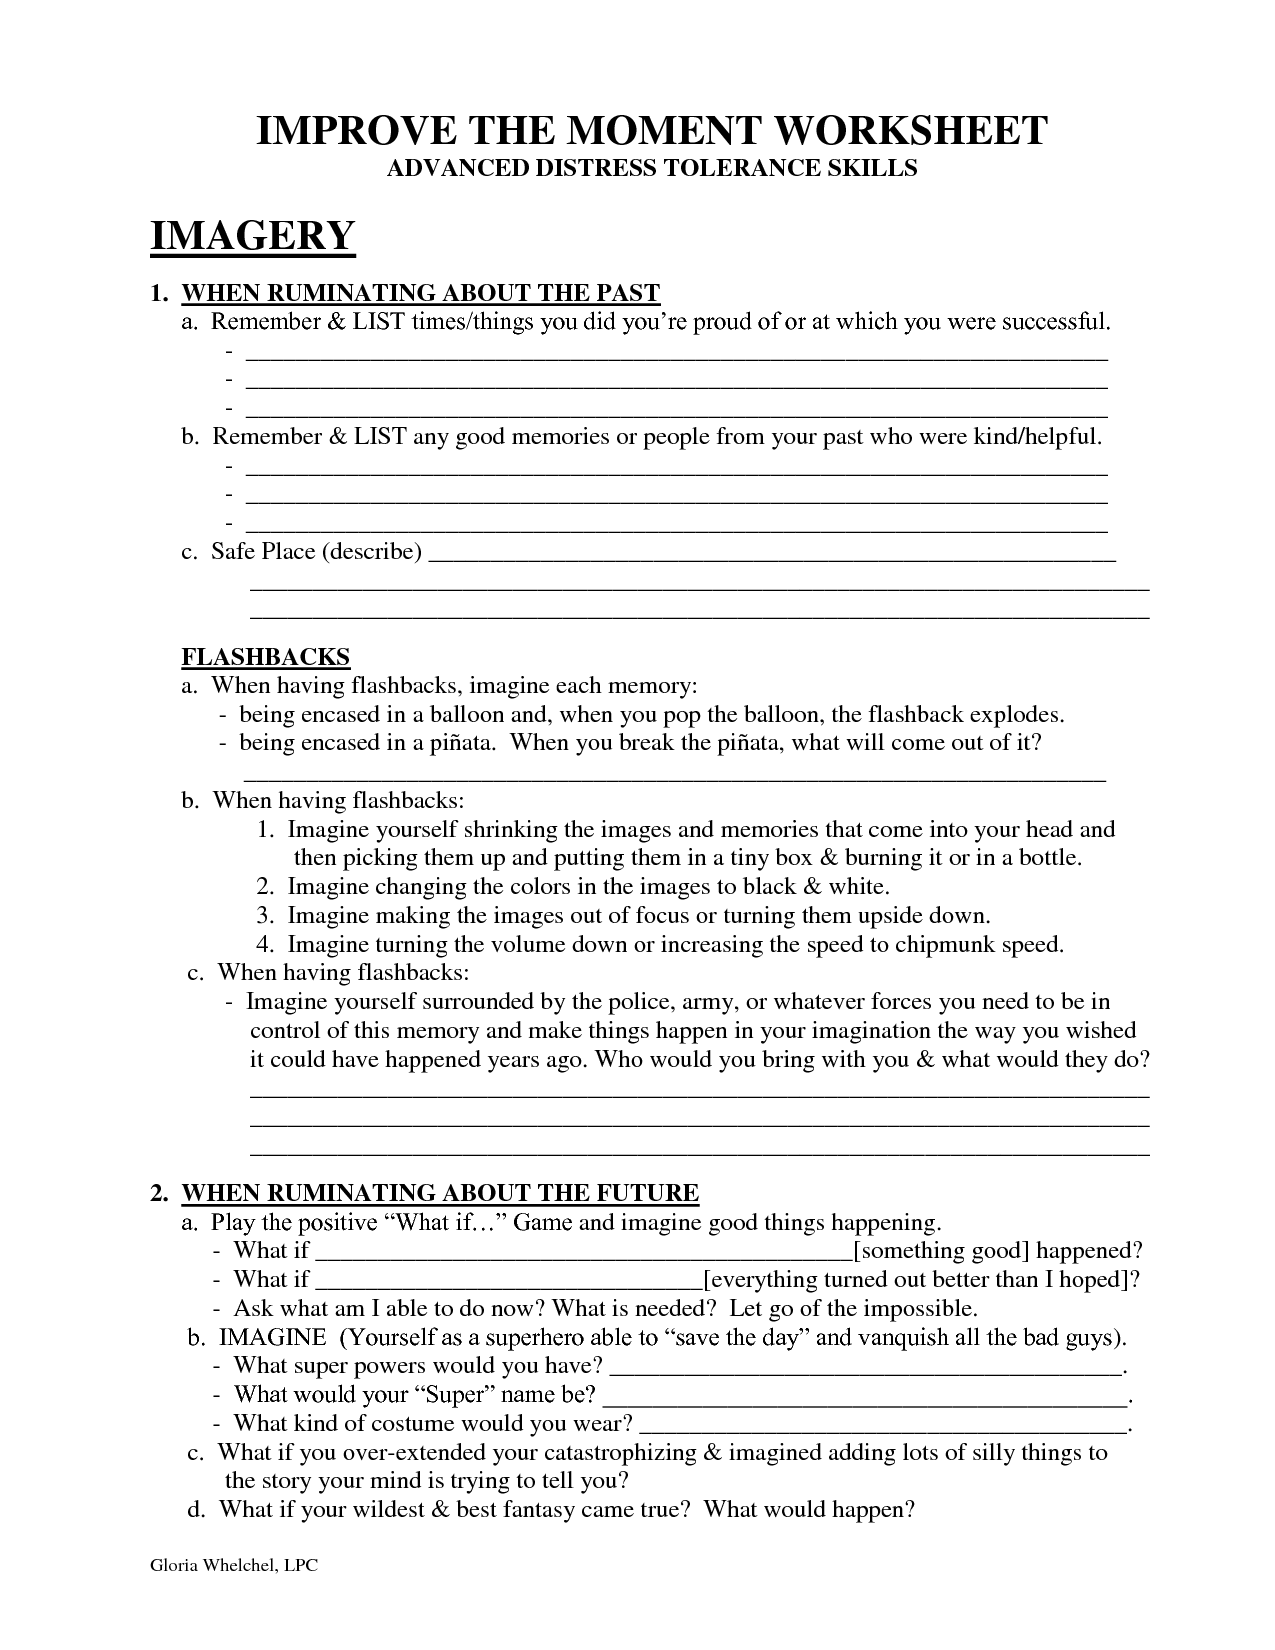 IMPROVE THE MOMENT WORKSHEET DBT Self Help Dbt Therapy Therapy 